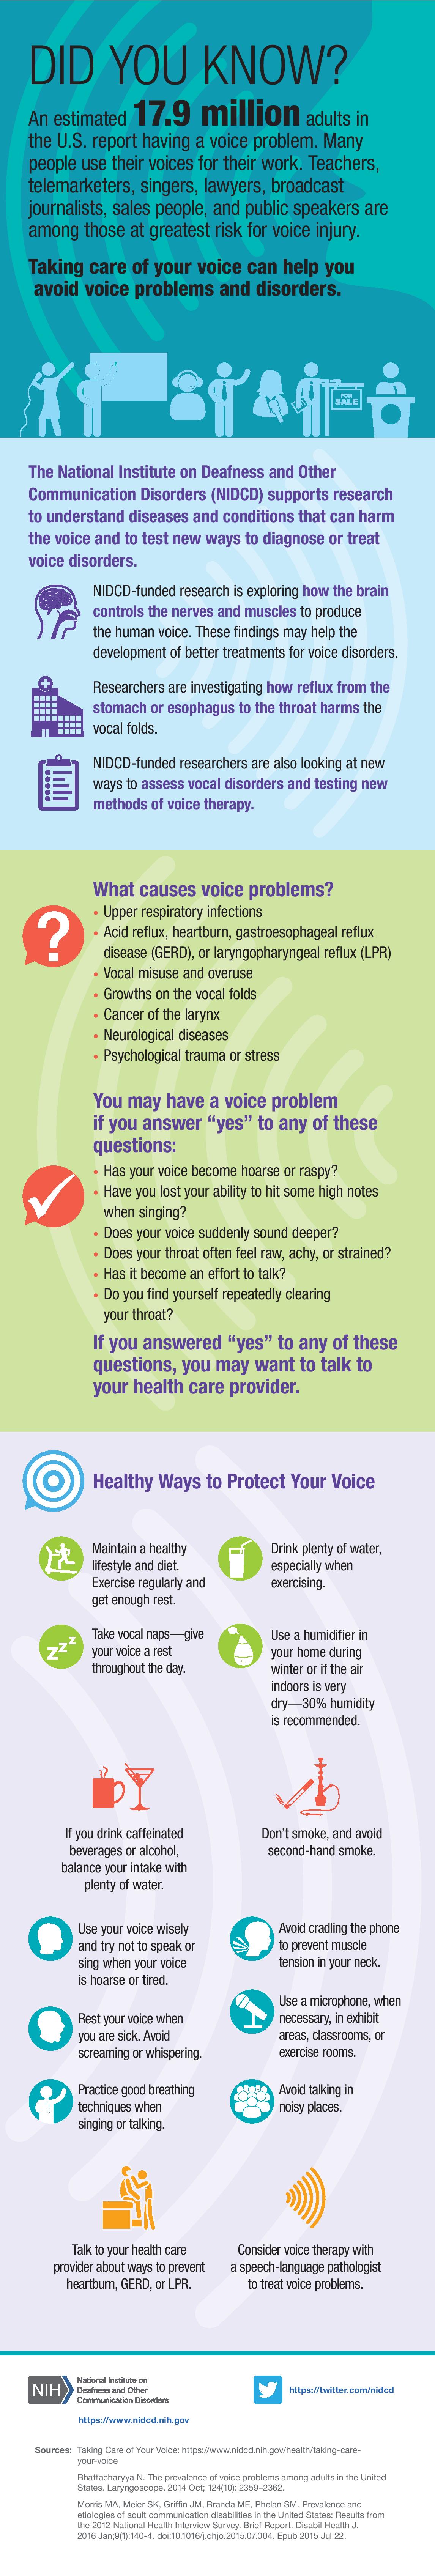 An infographic summarizing information and statistics about voice problems in U.S. adults.